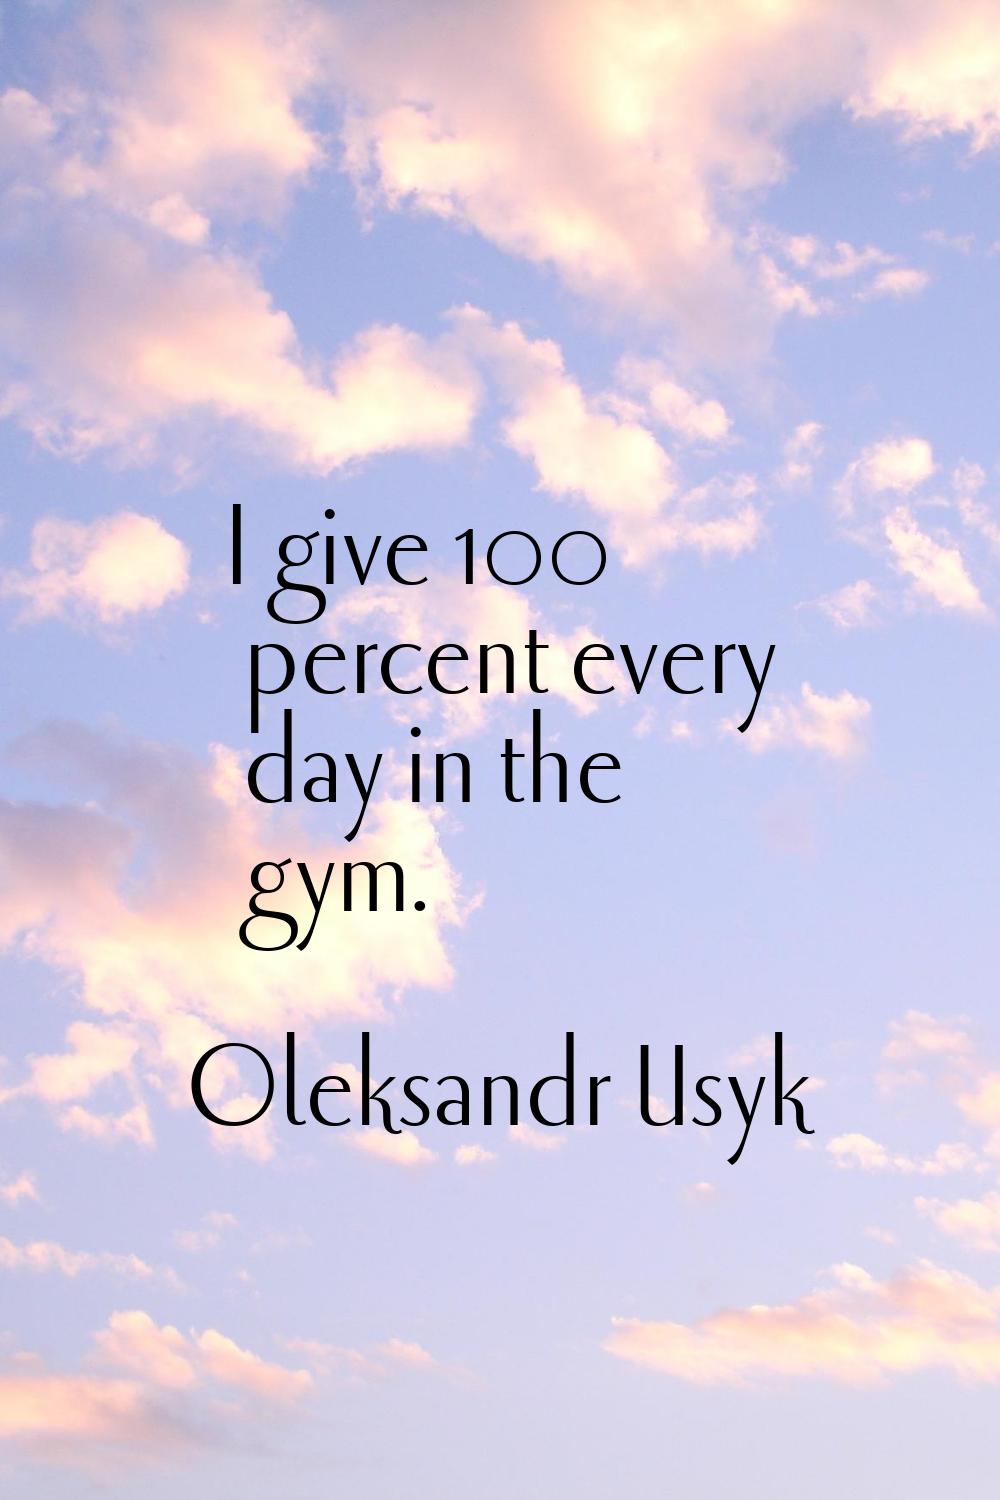 I give 100 percent every day in the gym.